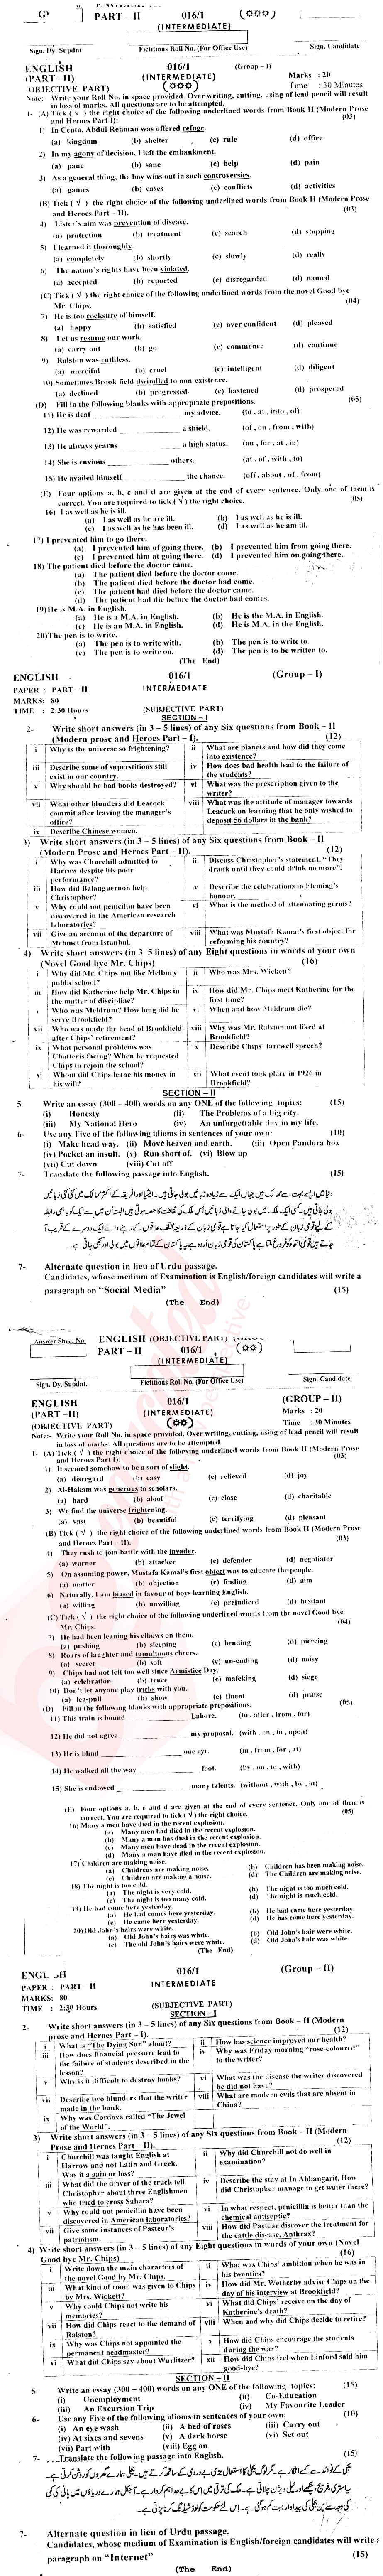 English 12th class Past Paper Group 1 BISE AJK 2016